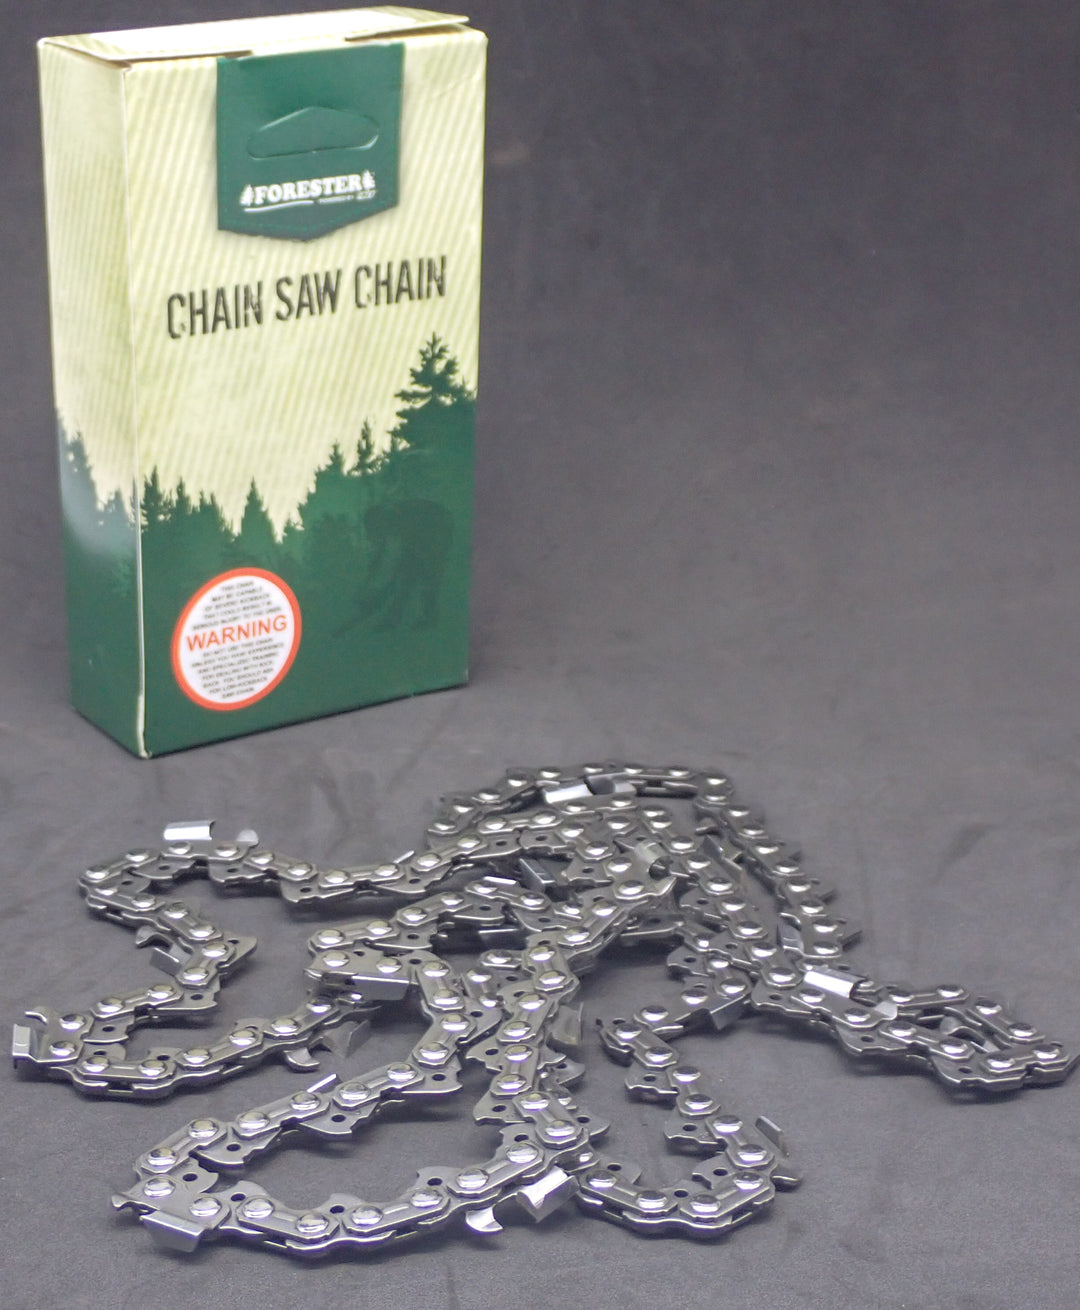 FORESTER FULL CHISEL SKIP TOOTH CHAINSAW CHAIN 3/8 .050 115DL